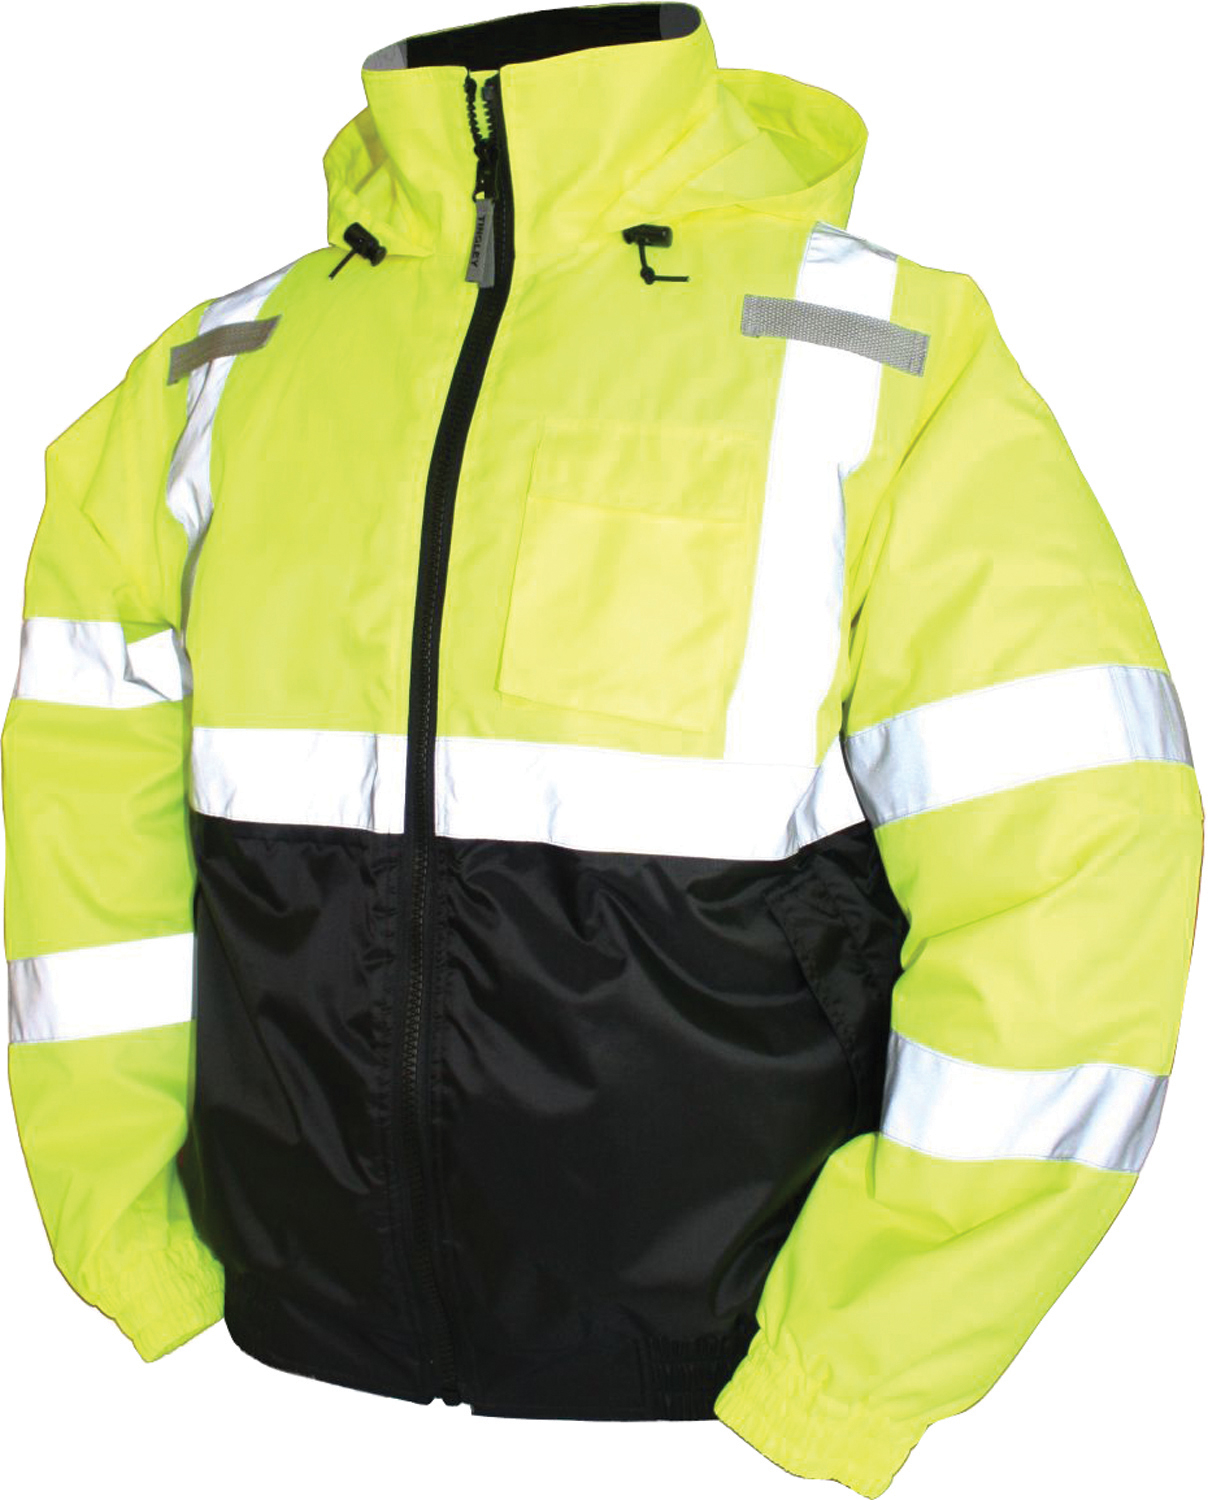 Tingley Rubber Corp.-Bomber Ii High Visibility Waterproof Jacket- Lime Green 2 Extra Large - image 3 of 4